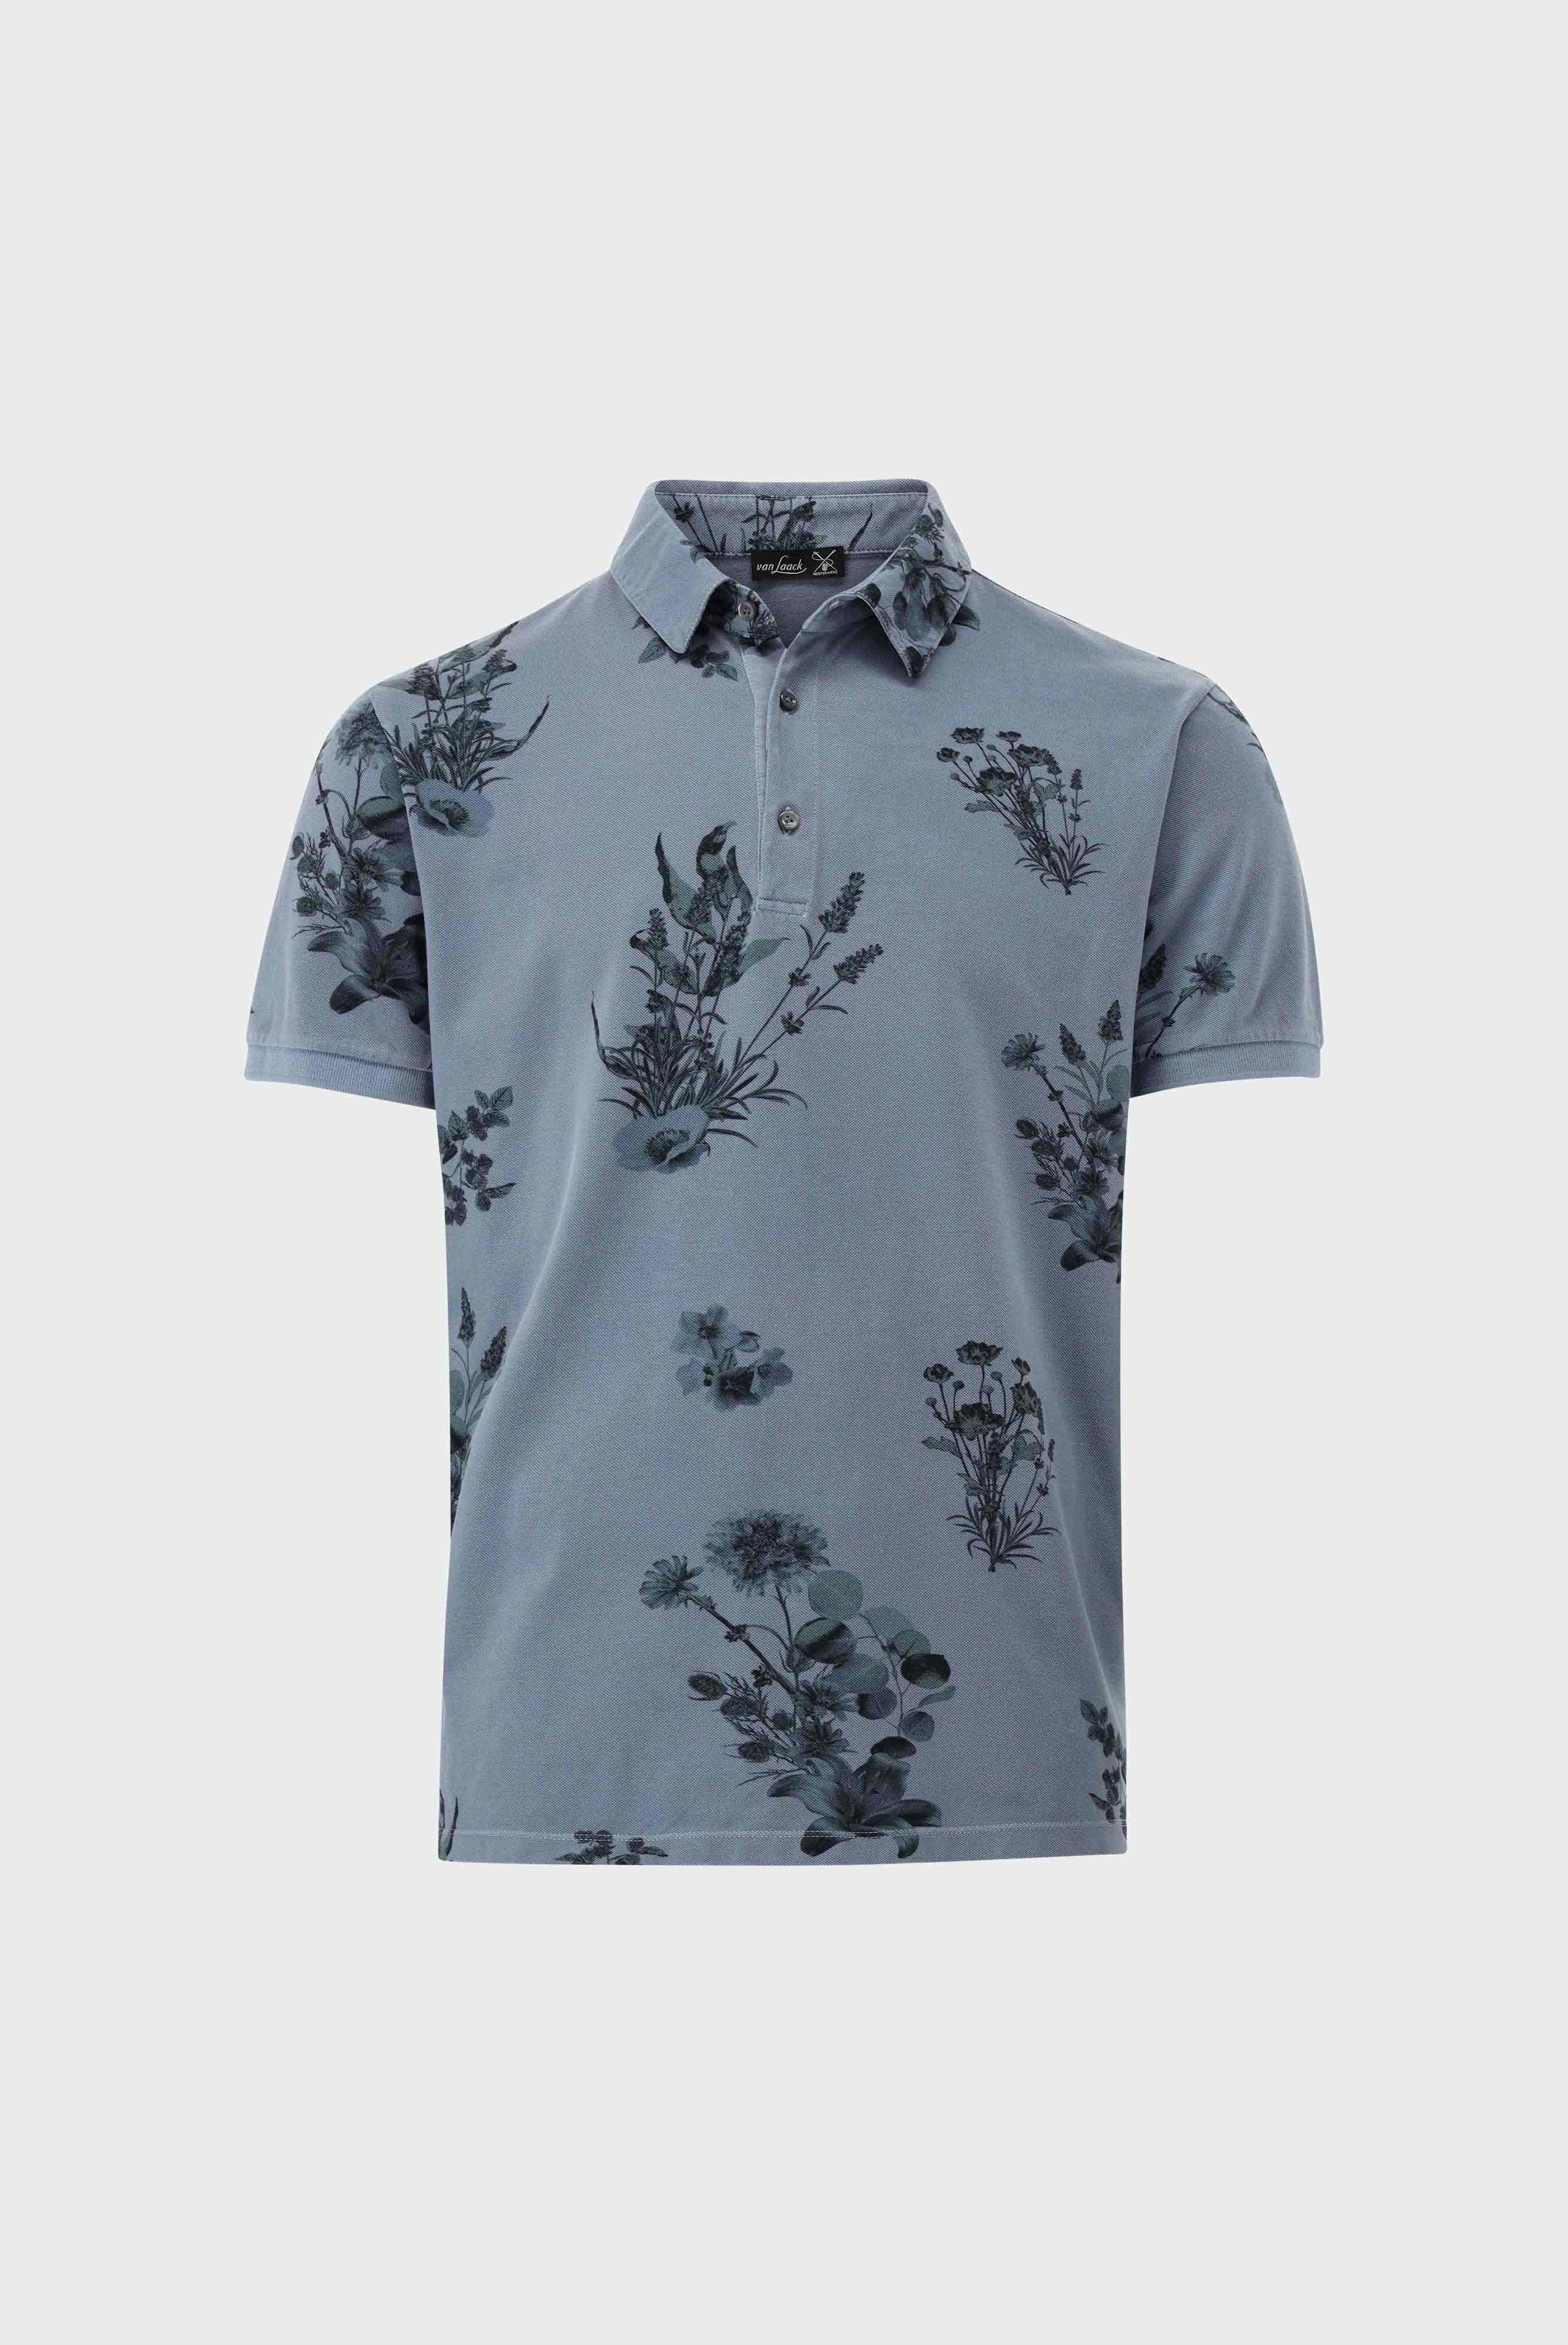 Poloshirts+Garment dyed Piquet Polo with Print+20.1650.SY.Z20047.760.S